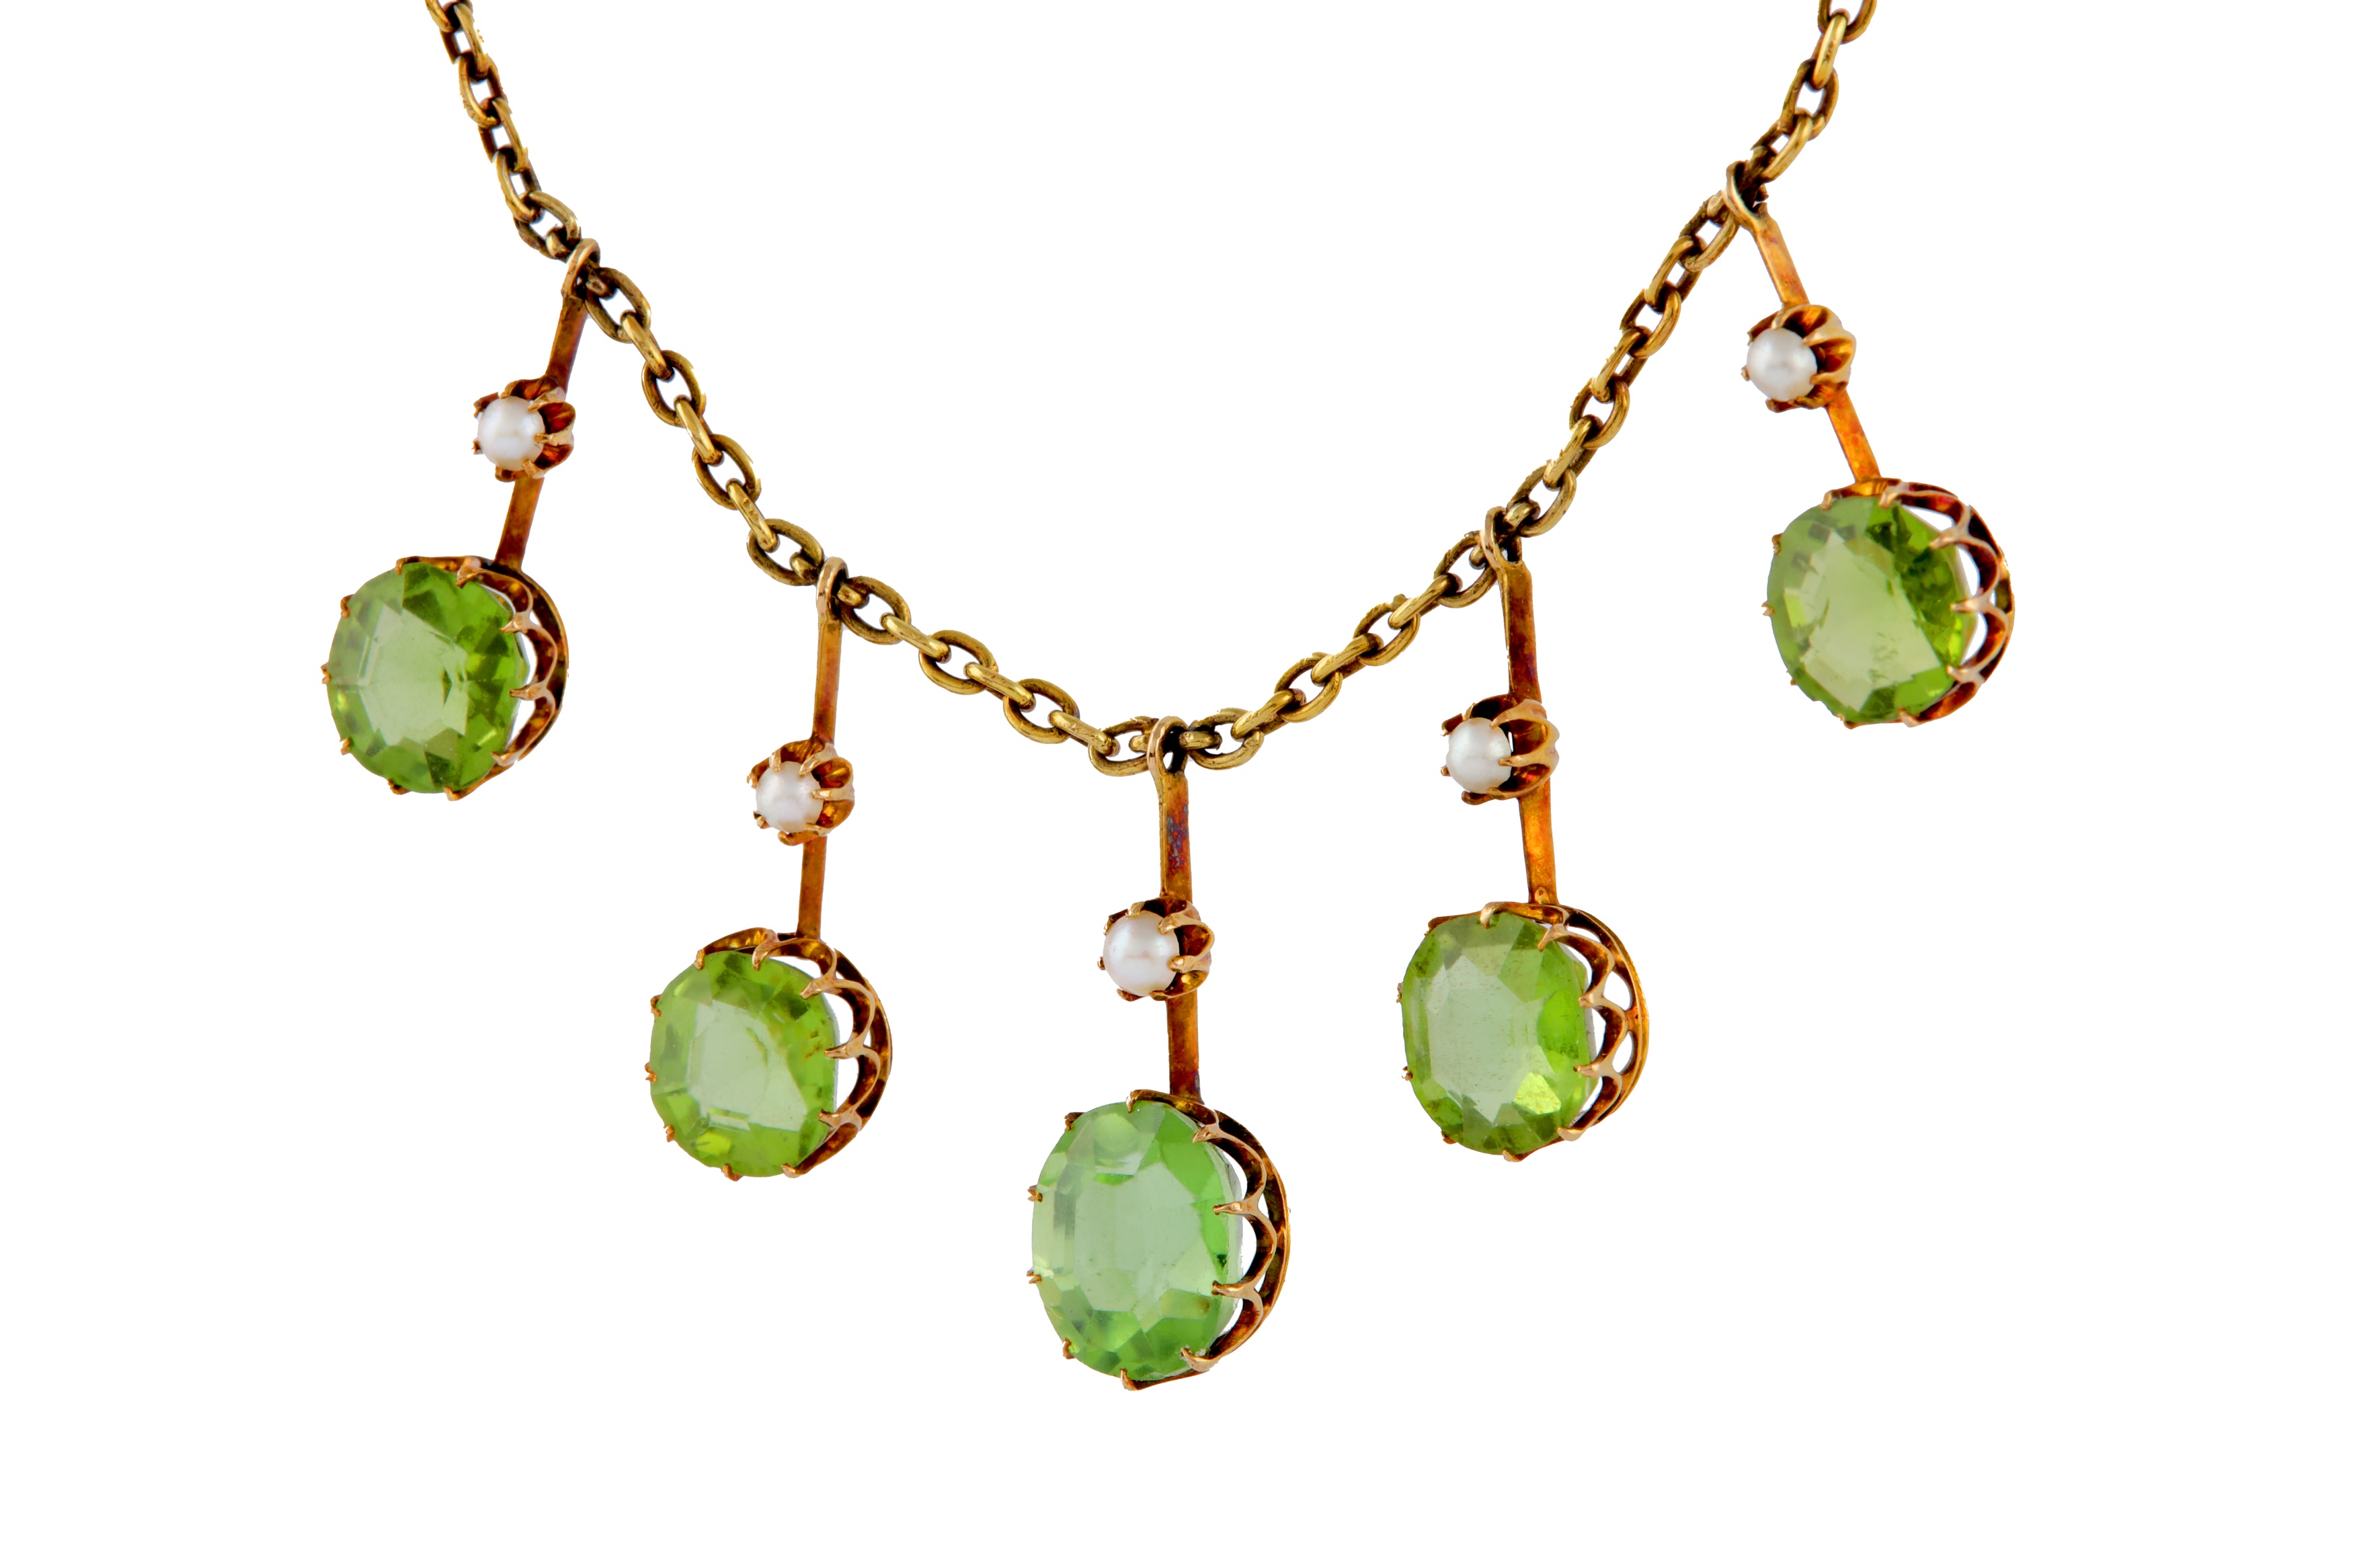 A PERIDOT AND SEED PEARL NECKLACE AND EARRING SUITE - Image 4 of 6